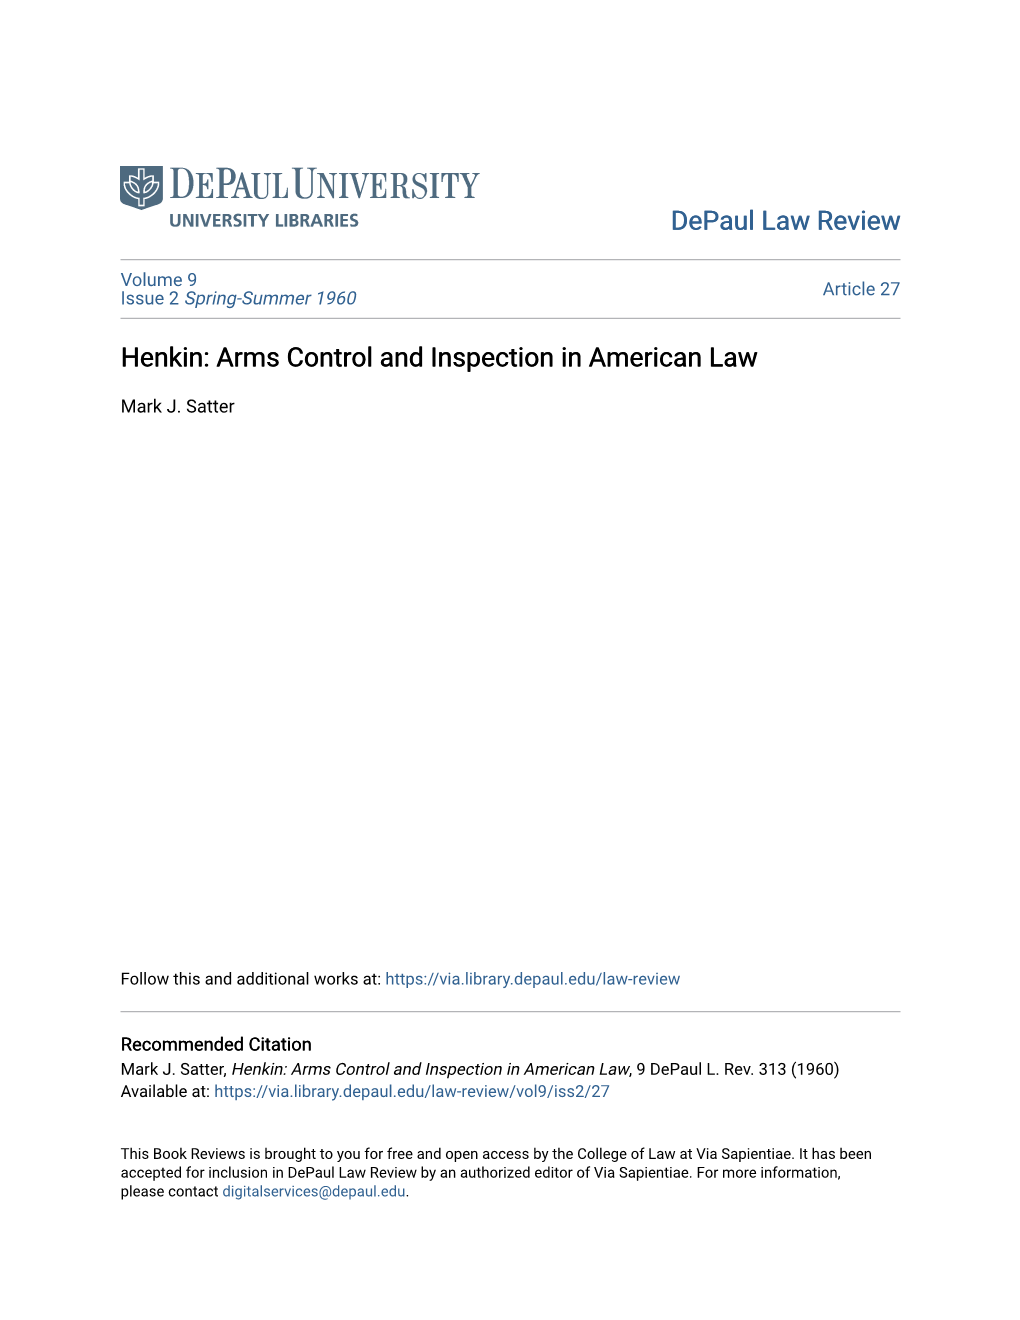 Henkin: Arms Control and Inspection in American Law